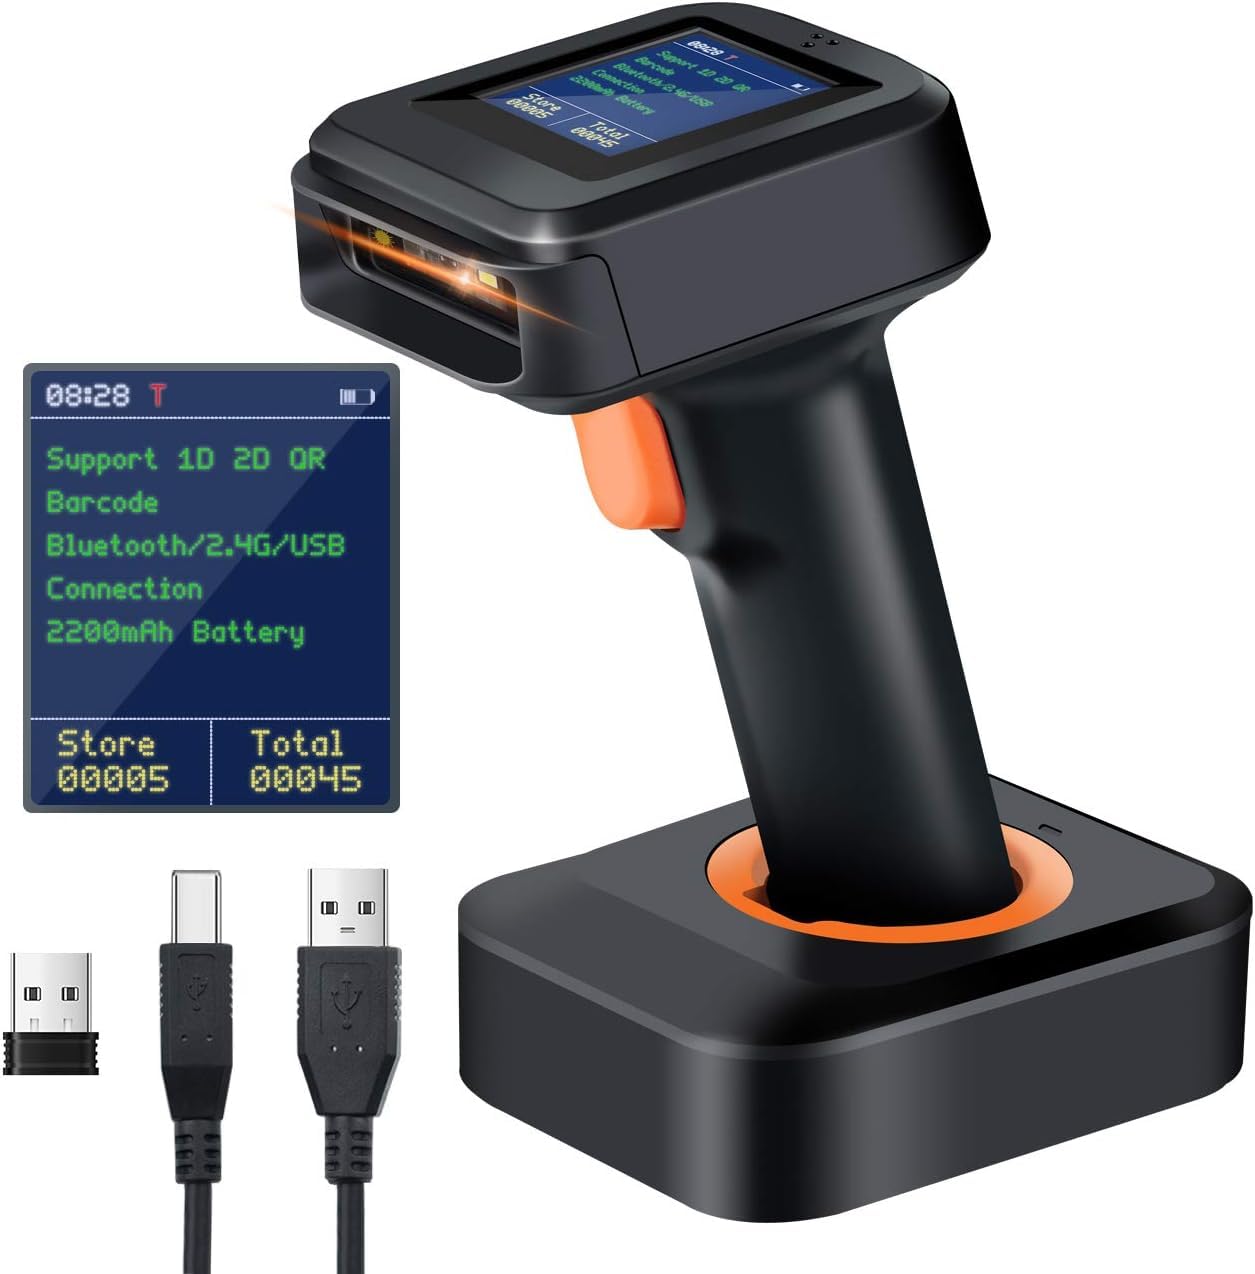 Tera Pro 1D 2D QR Wireless Barcode Scanner with Display Screen Battery Level Indicator Time Display Works with Bluetooth with Charging Cradle Base for Warehouse Supermarket Library HW0006 Pro